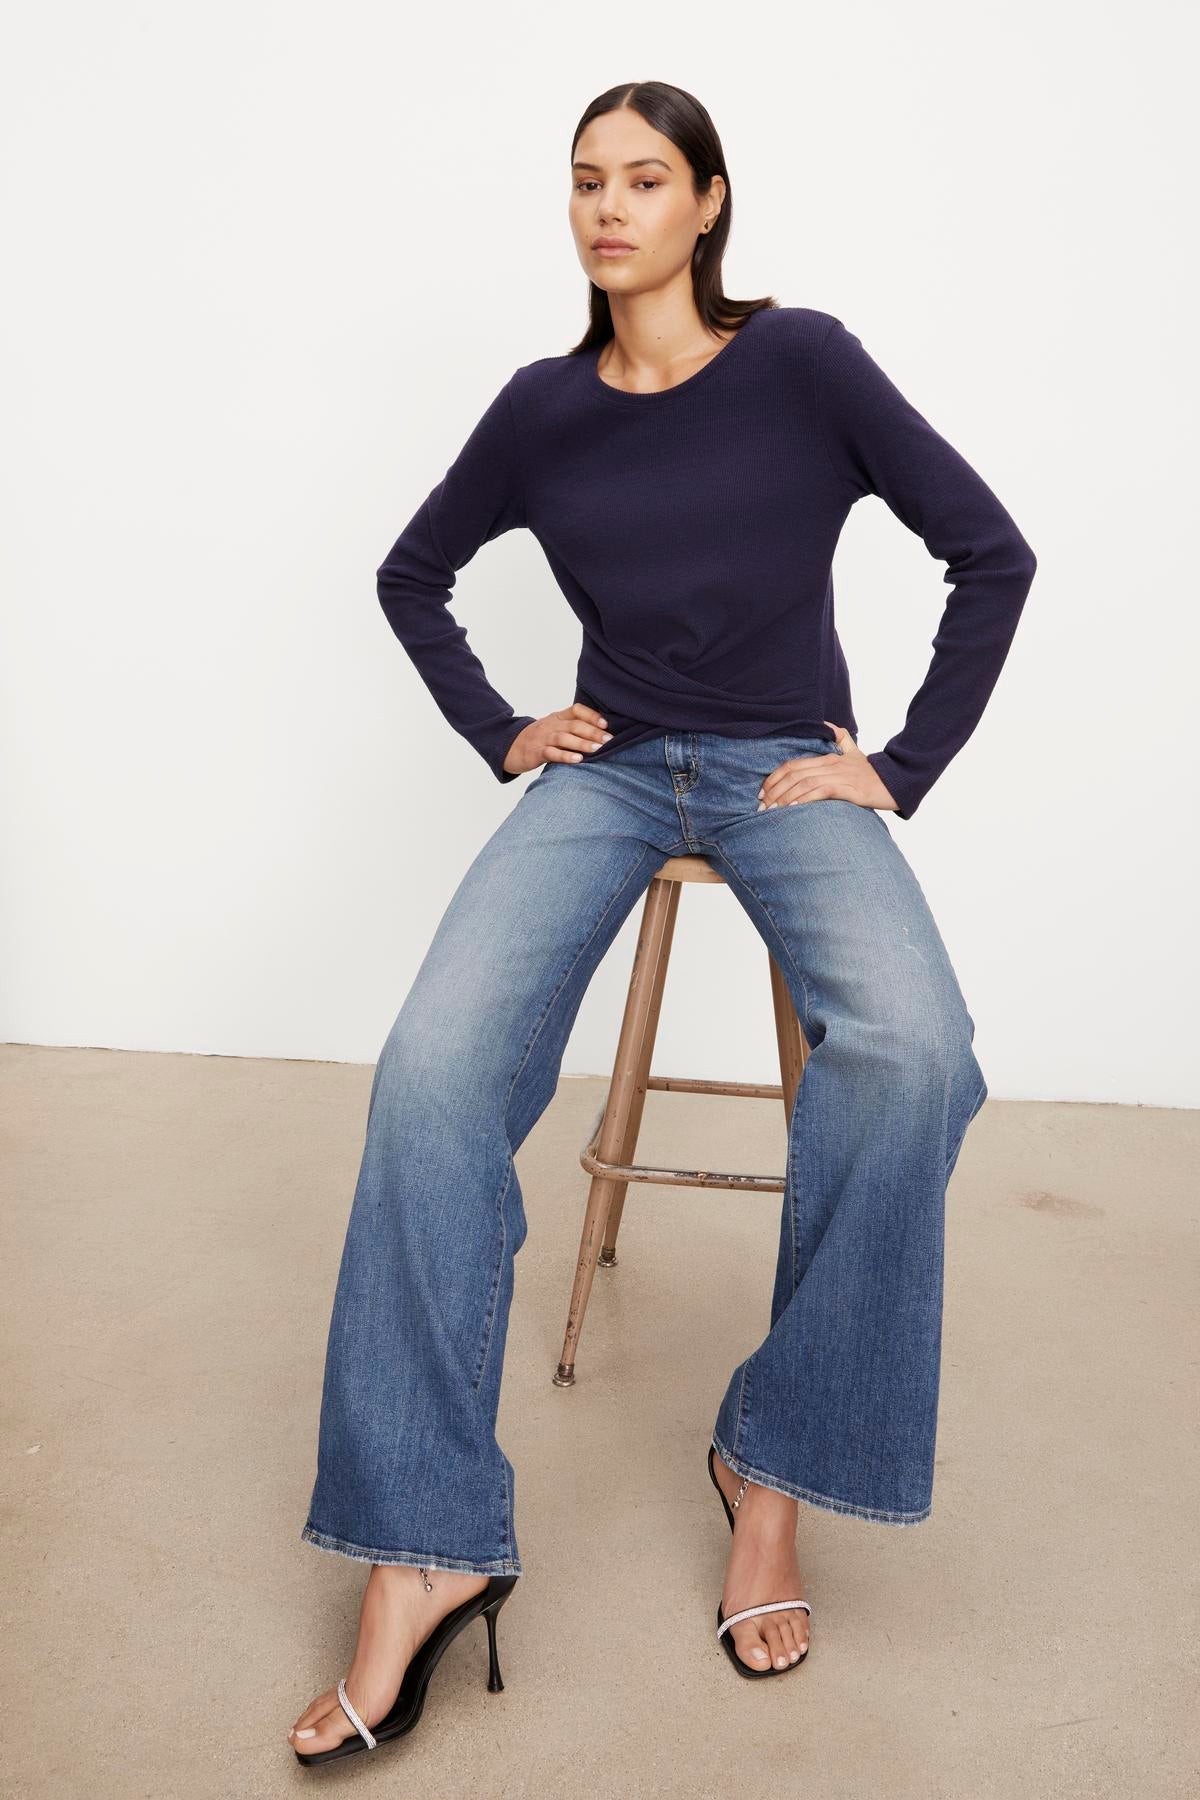   The model is wearing a Velvet by Graham & Spencer GEONNA BRUSHED RIB TOP and high - waisted jeans. 